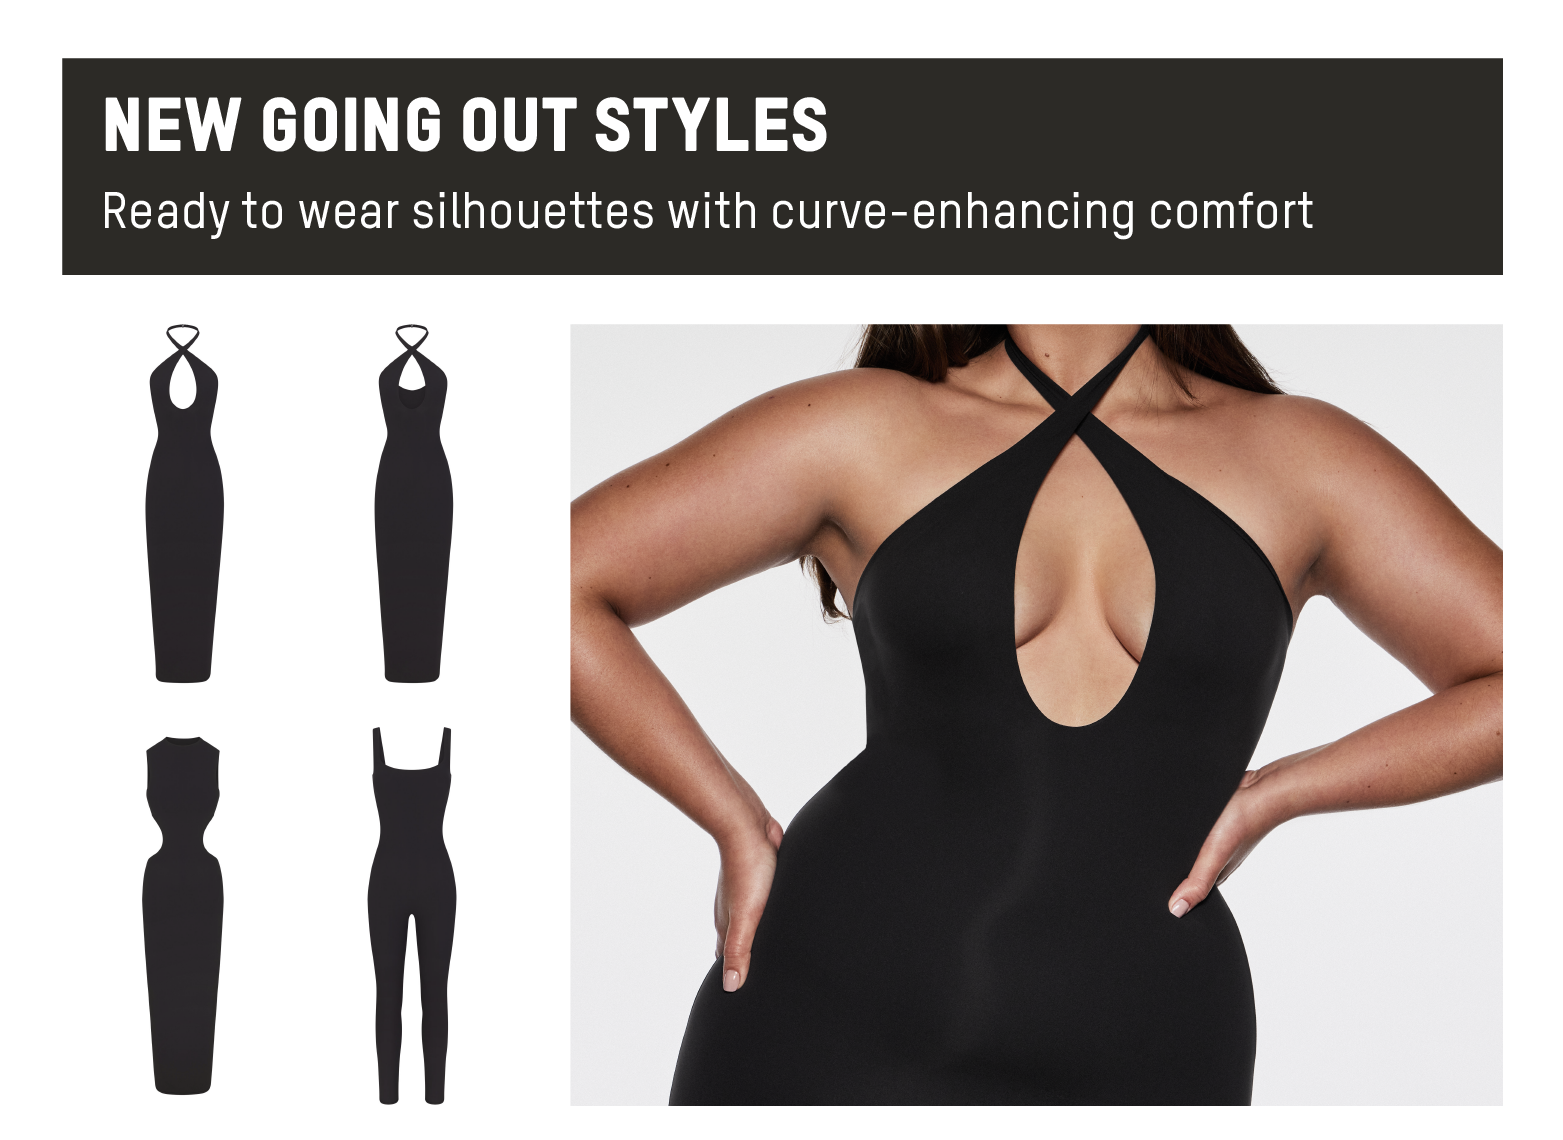 NEW GOING OUT STYLES